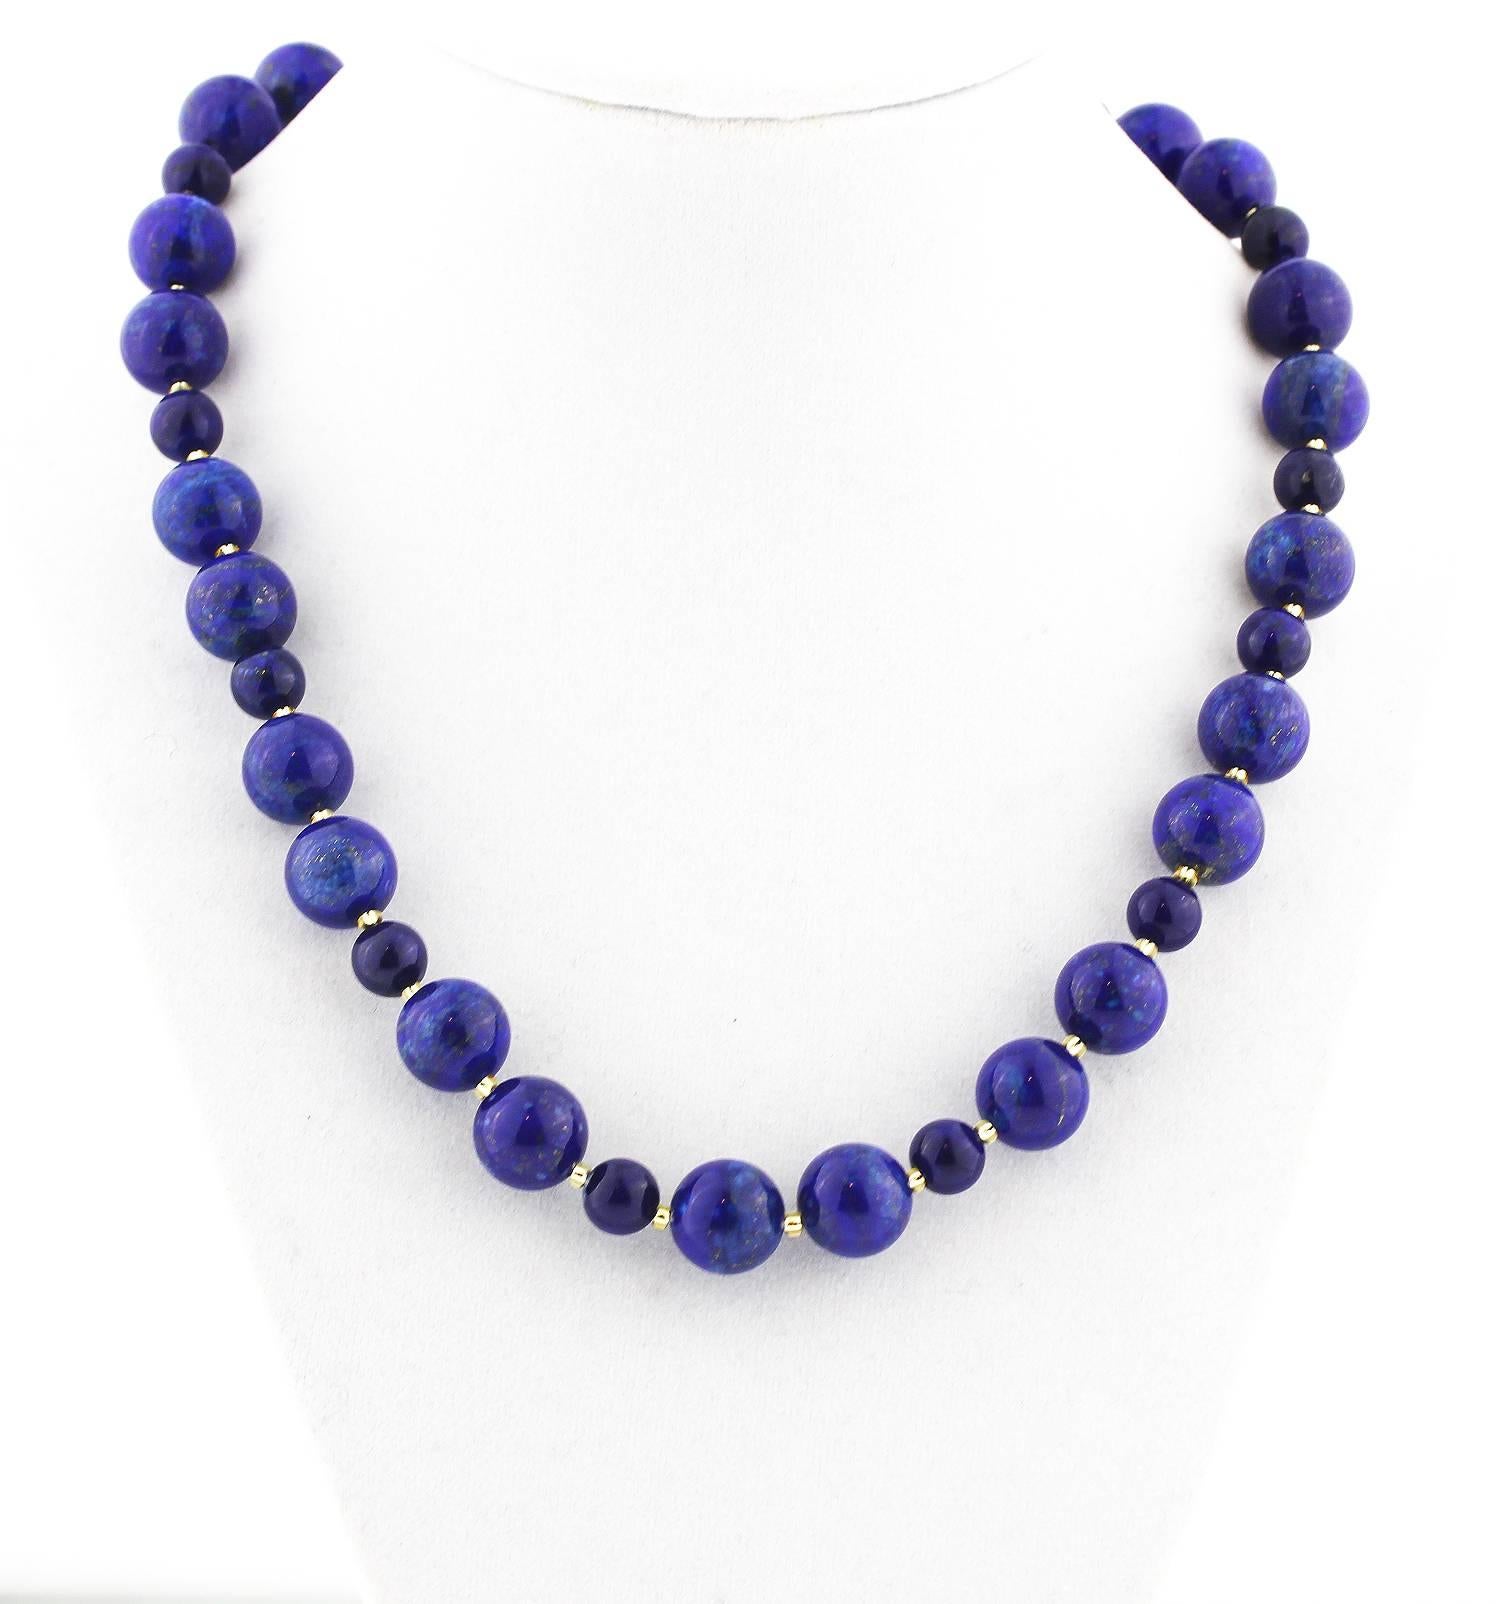 Natural highly polished glowing goldy flecked Afghan Lapis Lazuli Necklace
Size:  large ones 12 mm smaller ones 8 mm
Length:  18 inches
Clasp:  gold plated 